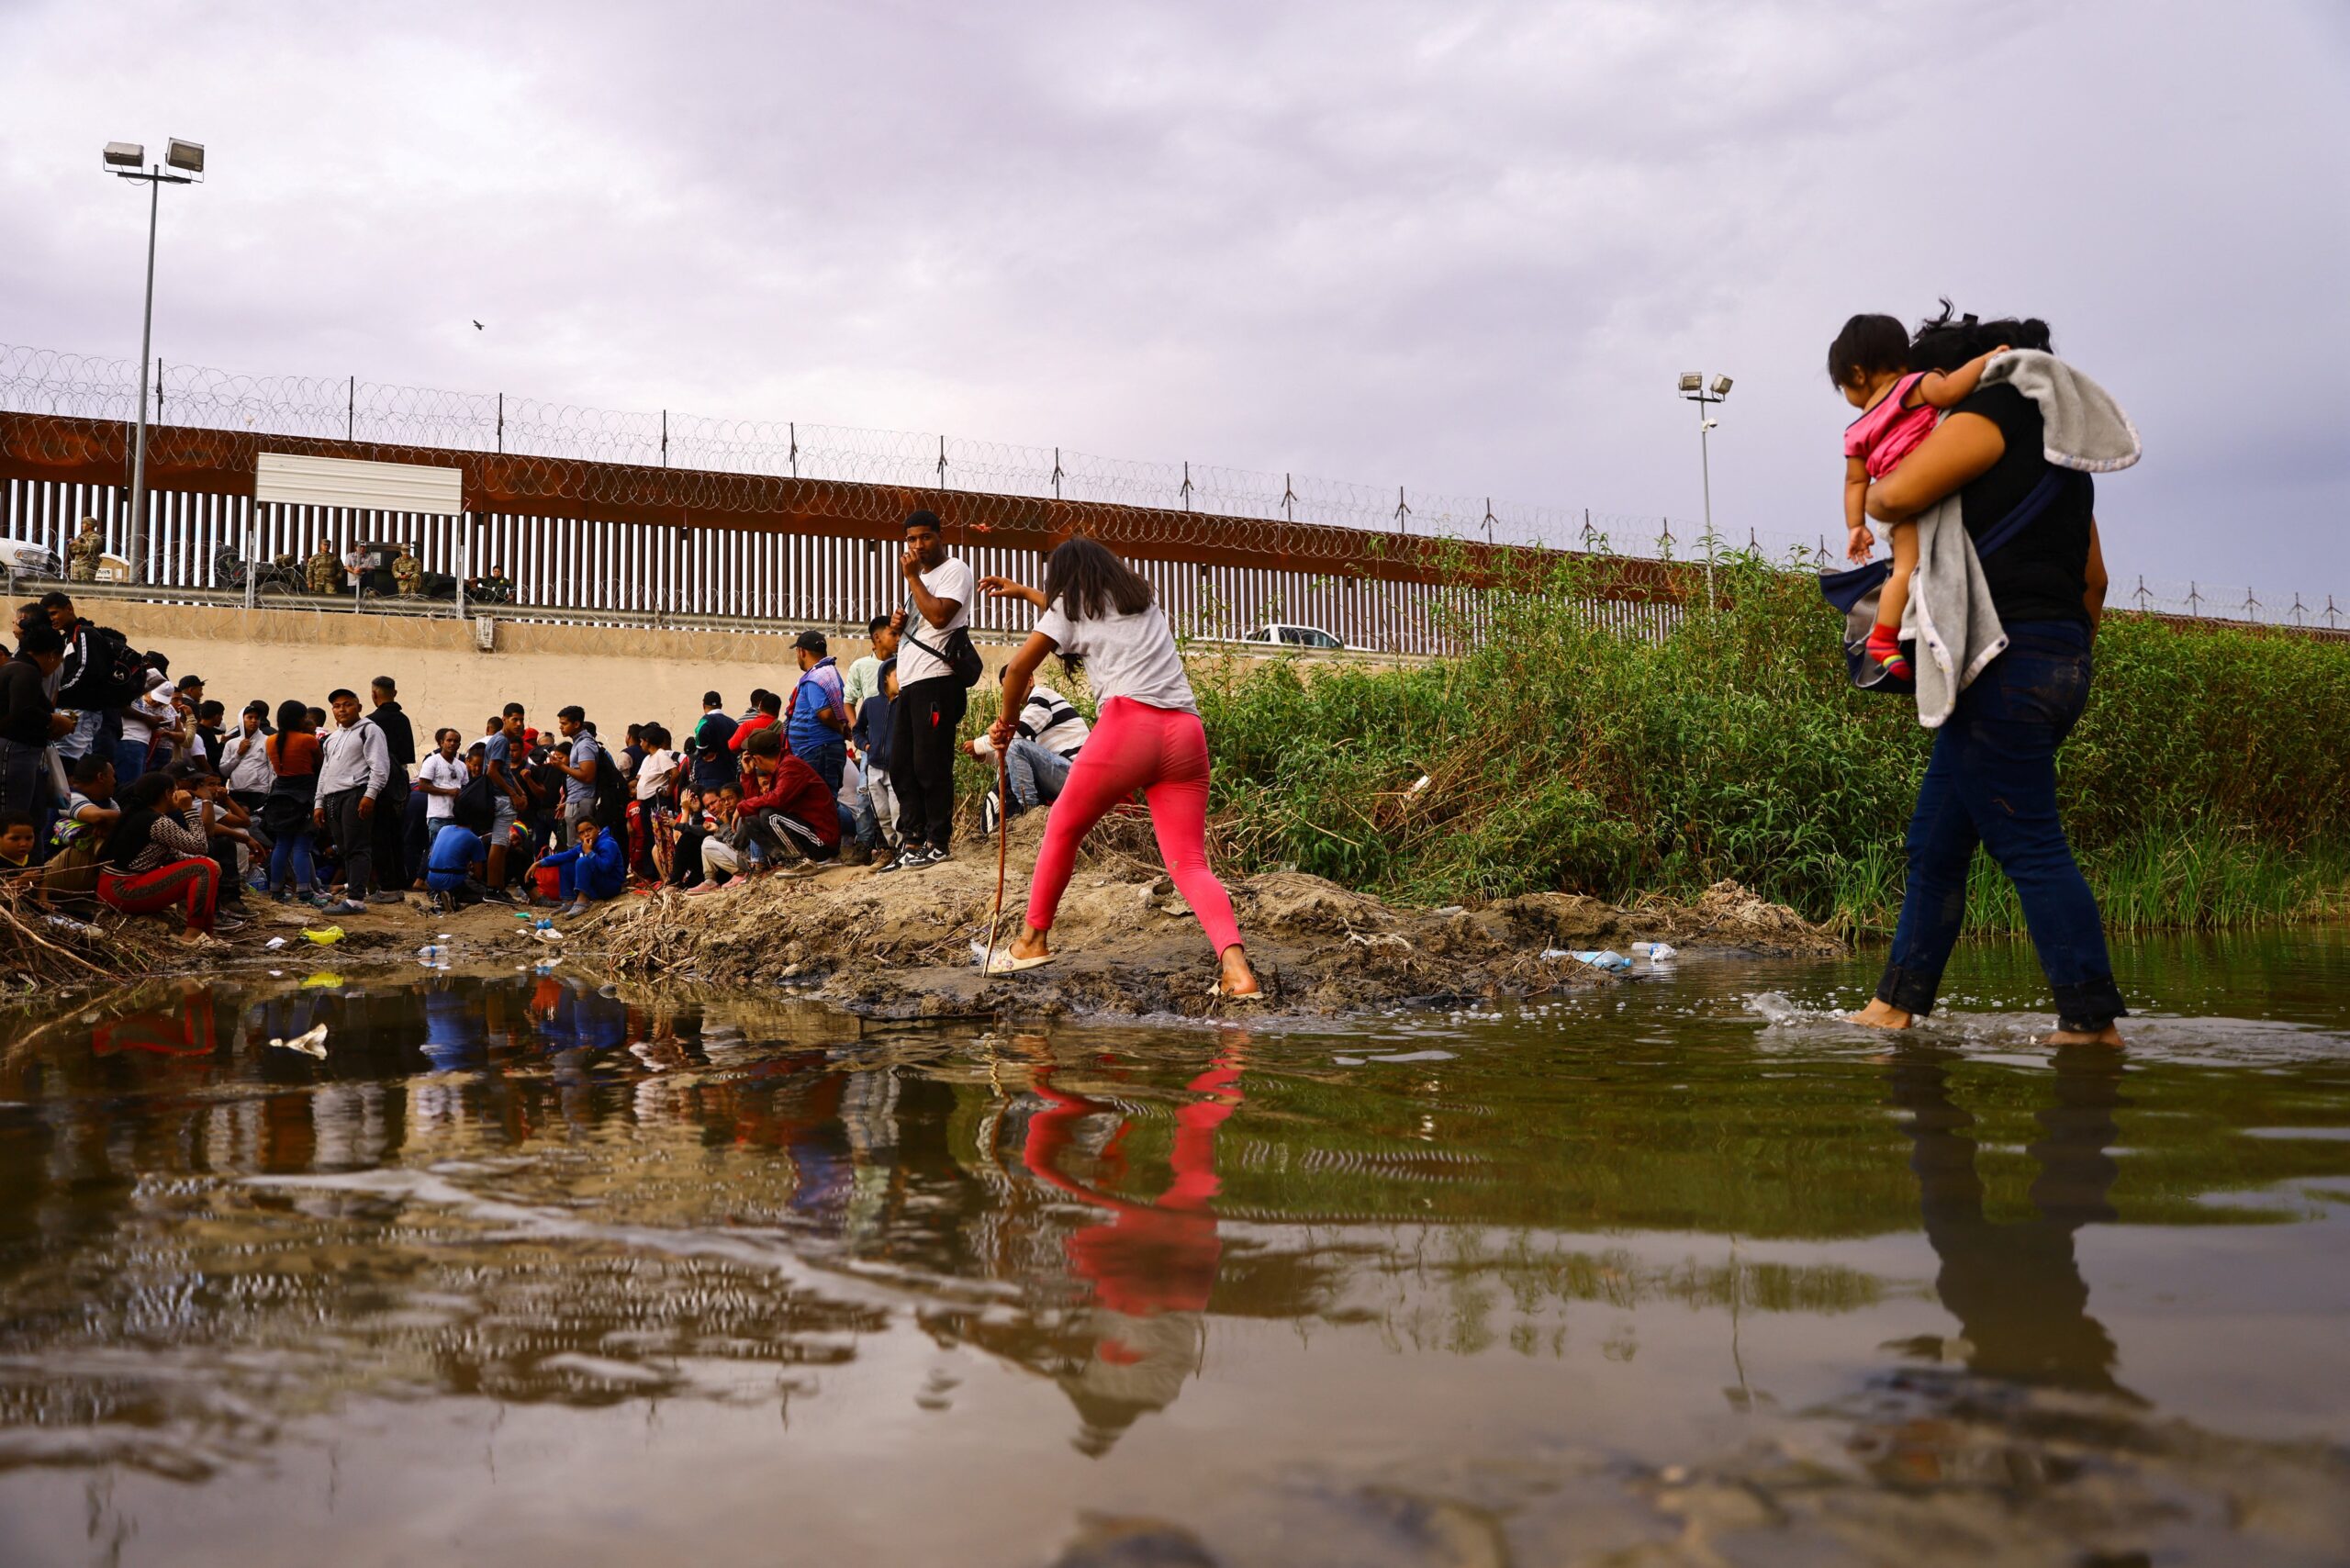 Migrants seeking asylum in the United States gather near a wire fence Sept. 12, 2023, as members of the Texas National Guard stand by to stop migrants from entering the United States after crossing the Rio Grande from Mexico. (OSV News photo/Jose Luis Gonzalez, Reuters)